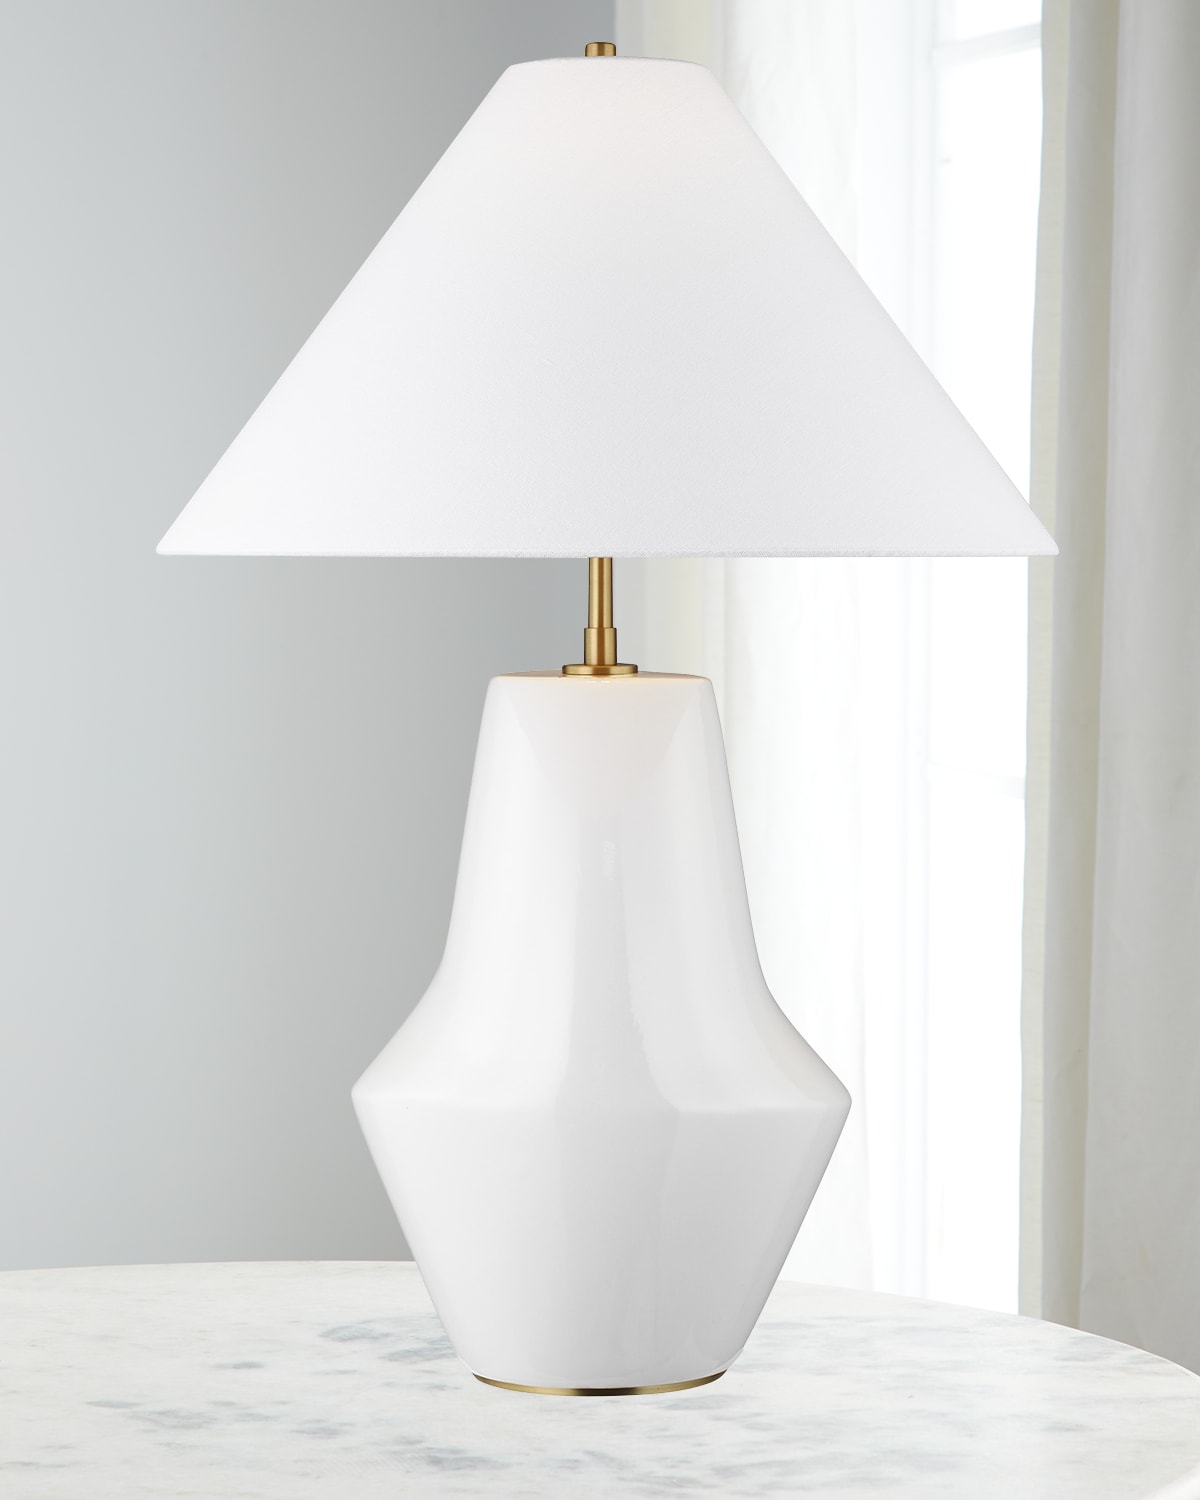 Contour Short Table Lamp By Kelly Wearstler